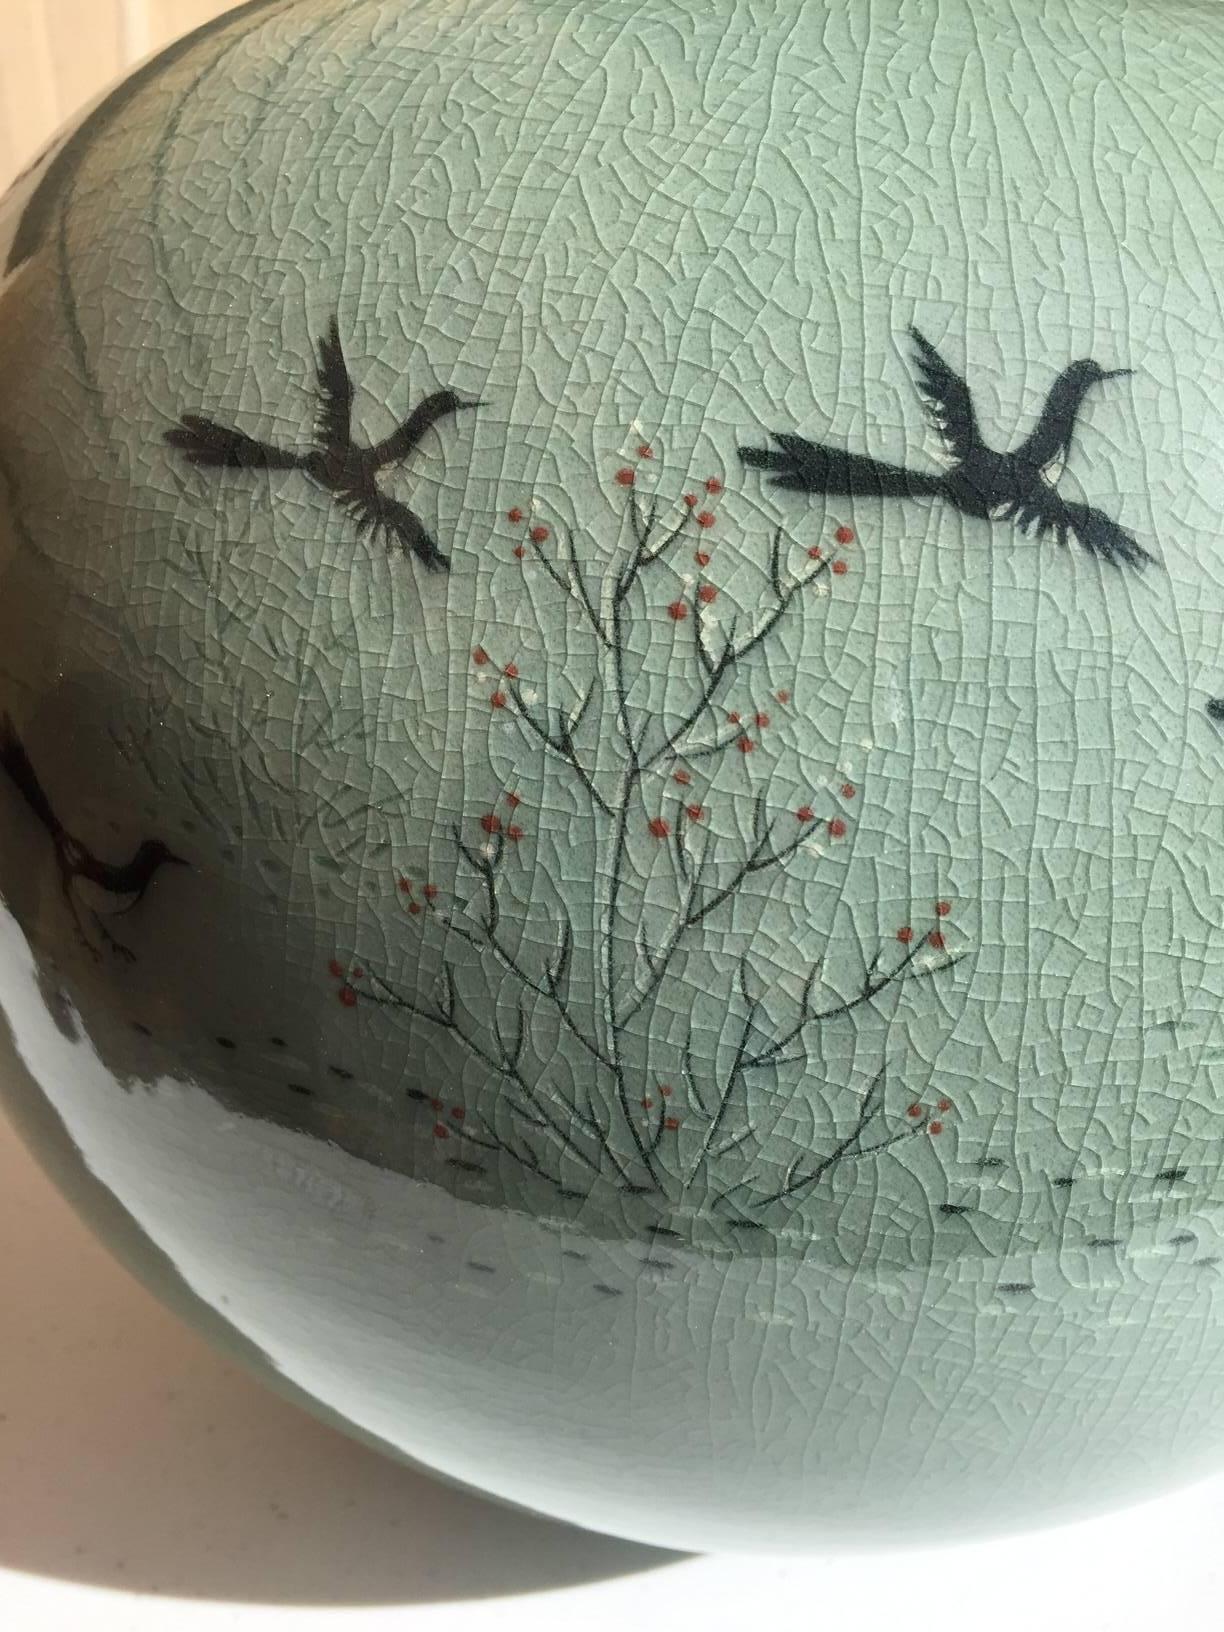 Signed, Mint and Boxed

Korea, a fine and beautiful bluish green ceramic vessel depicting - birds in flight - among cherry blossoms, with signed box, mid to late 20th century, 

Dimensions: 11 inches high and 14 inches diameter. Excellent crackled